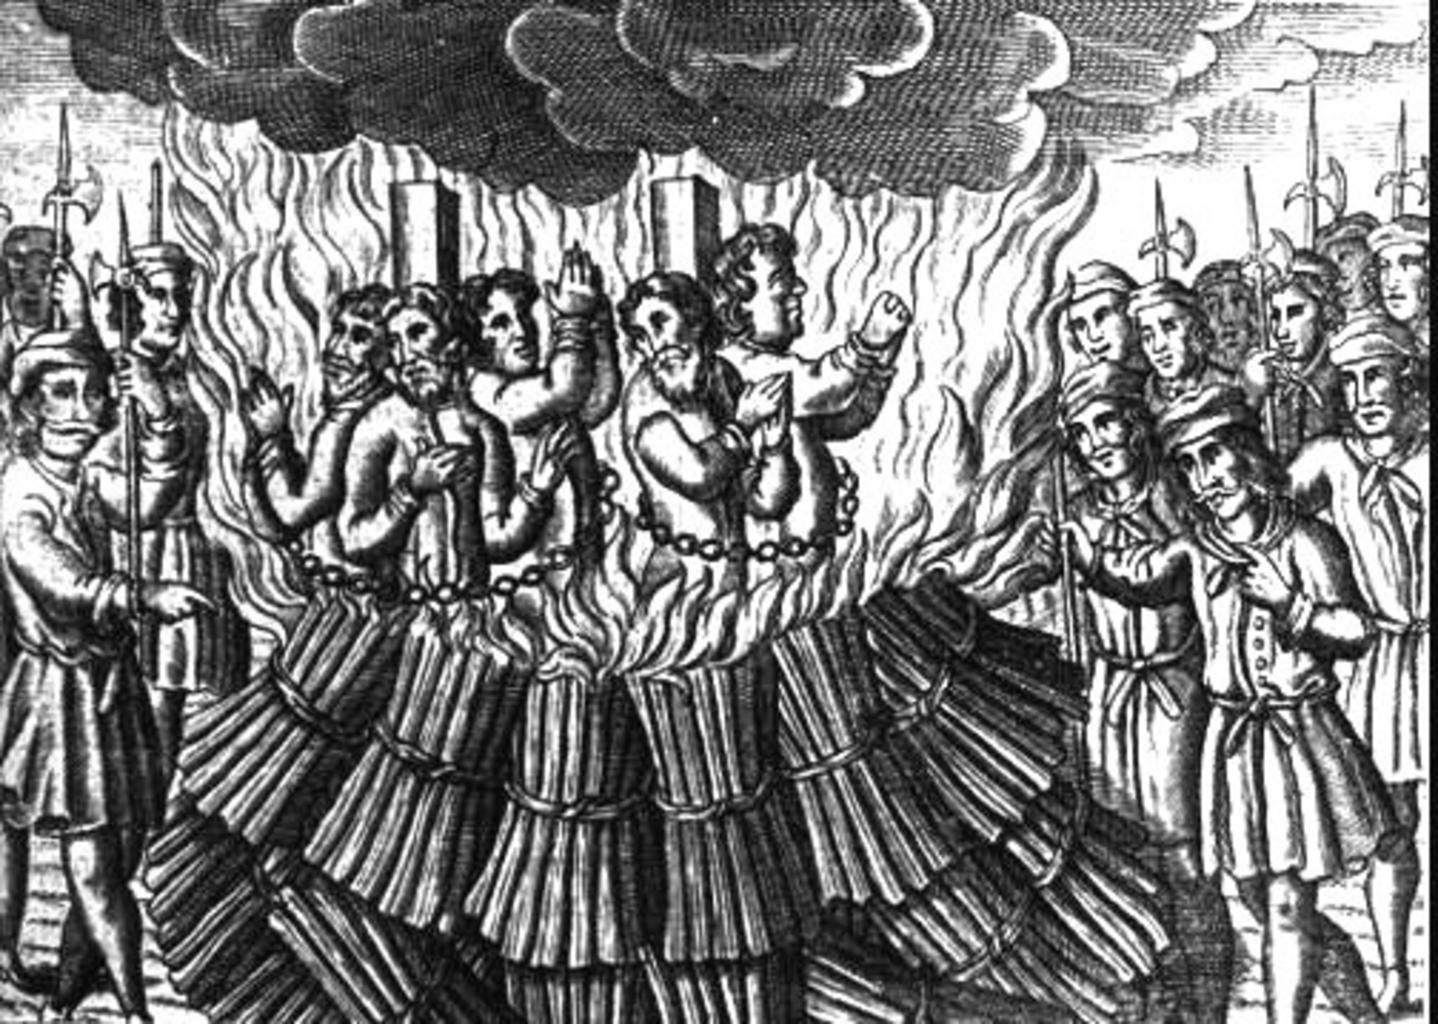 Religious trauma by being burned as heretics